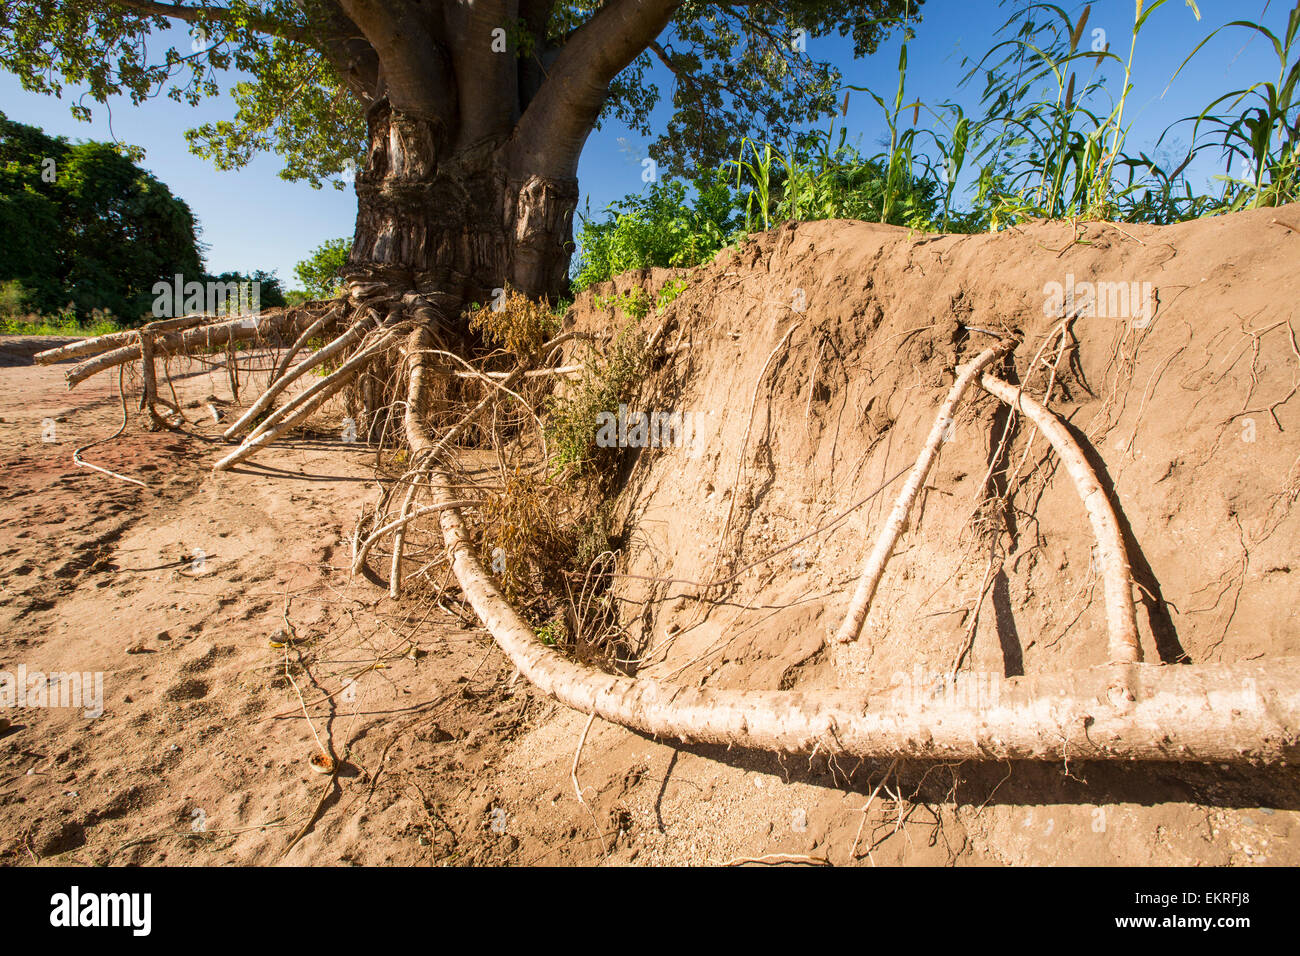 In mid January 2015, a three day period of excessive rain brought unprecedented floods to the small poor African country of Malawi. It displaced nearly quarter of a million people, devastated 64,000 hectares of land, and killed several hundred people. This shot shows a tree that has been undermined when the farmland soil was washed away around it, near Bangula, Malawi. Stock Photo